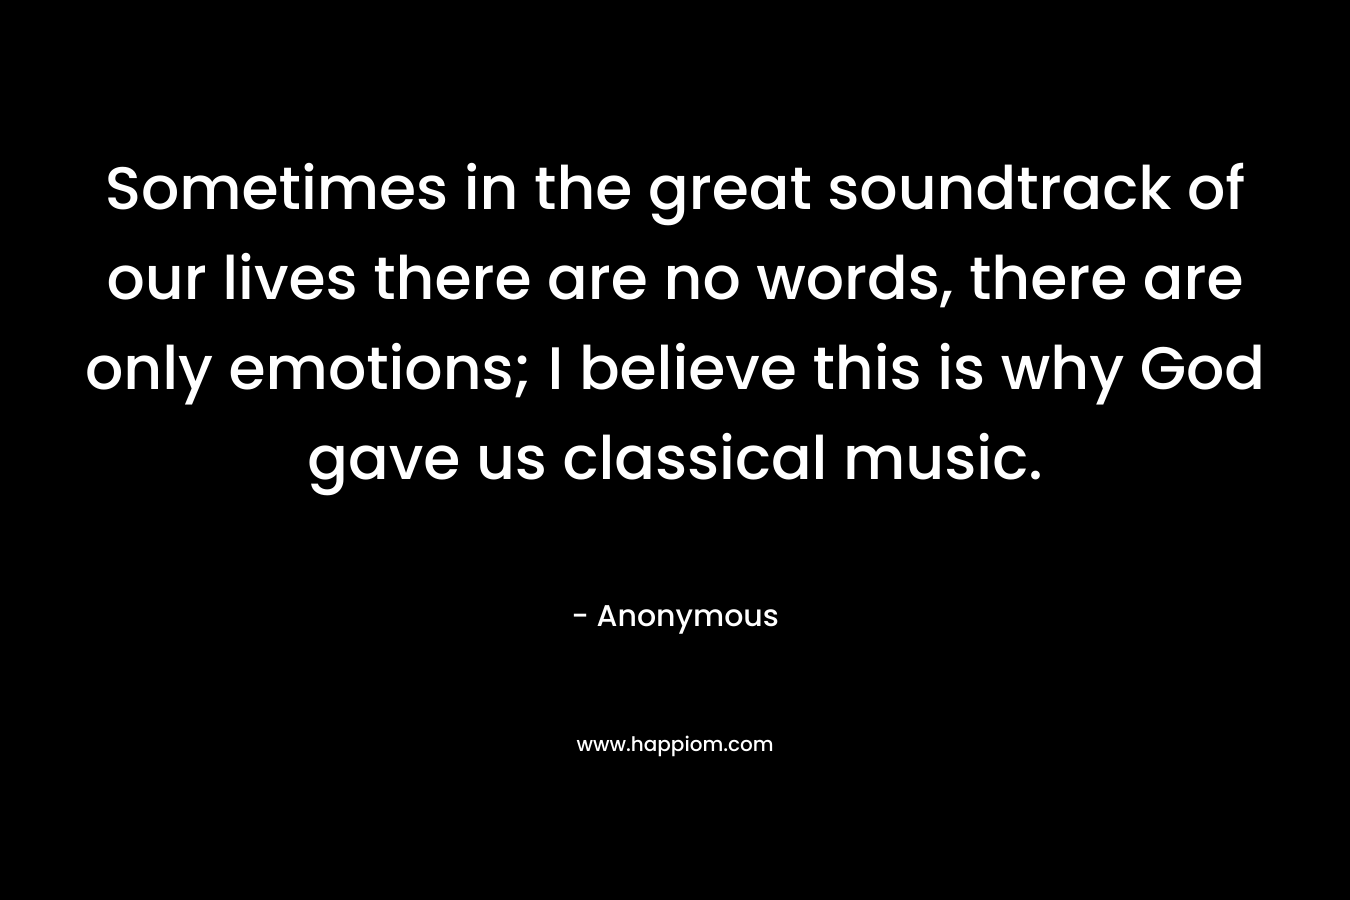 Sometimes in the great soundtrack of our lives there are no words, there are only emotions; I believe this is why God gave us classical music.